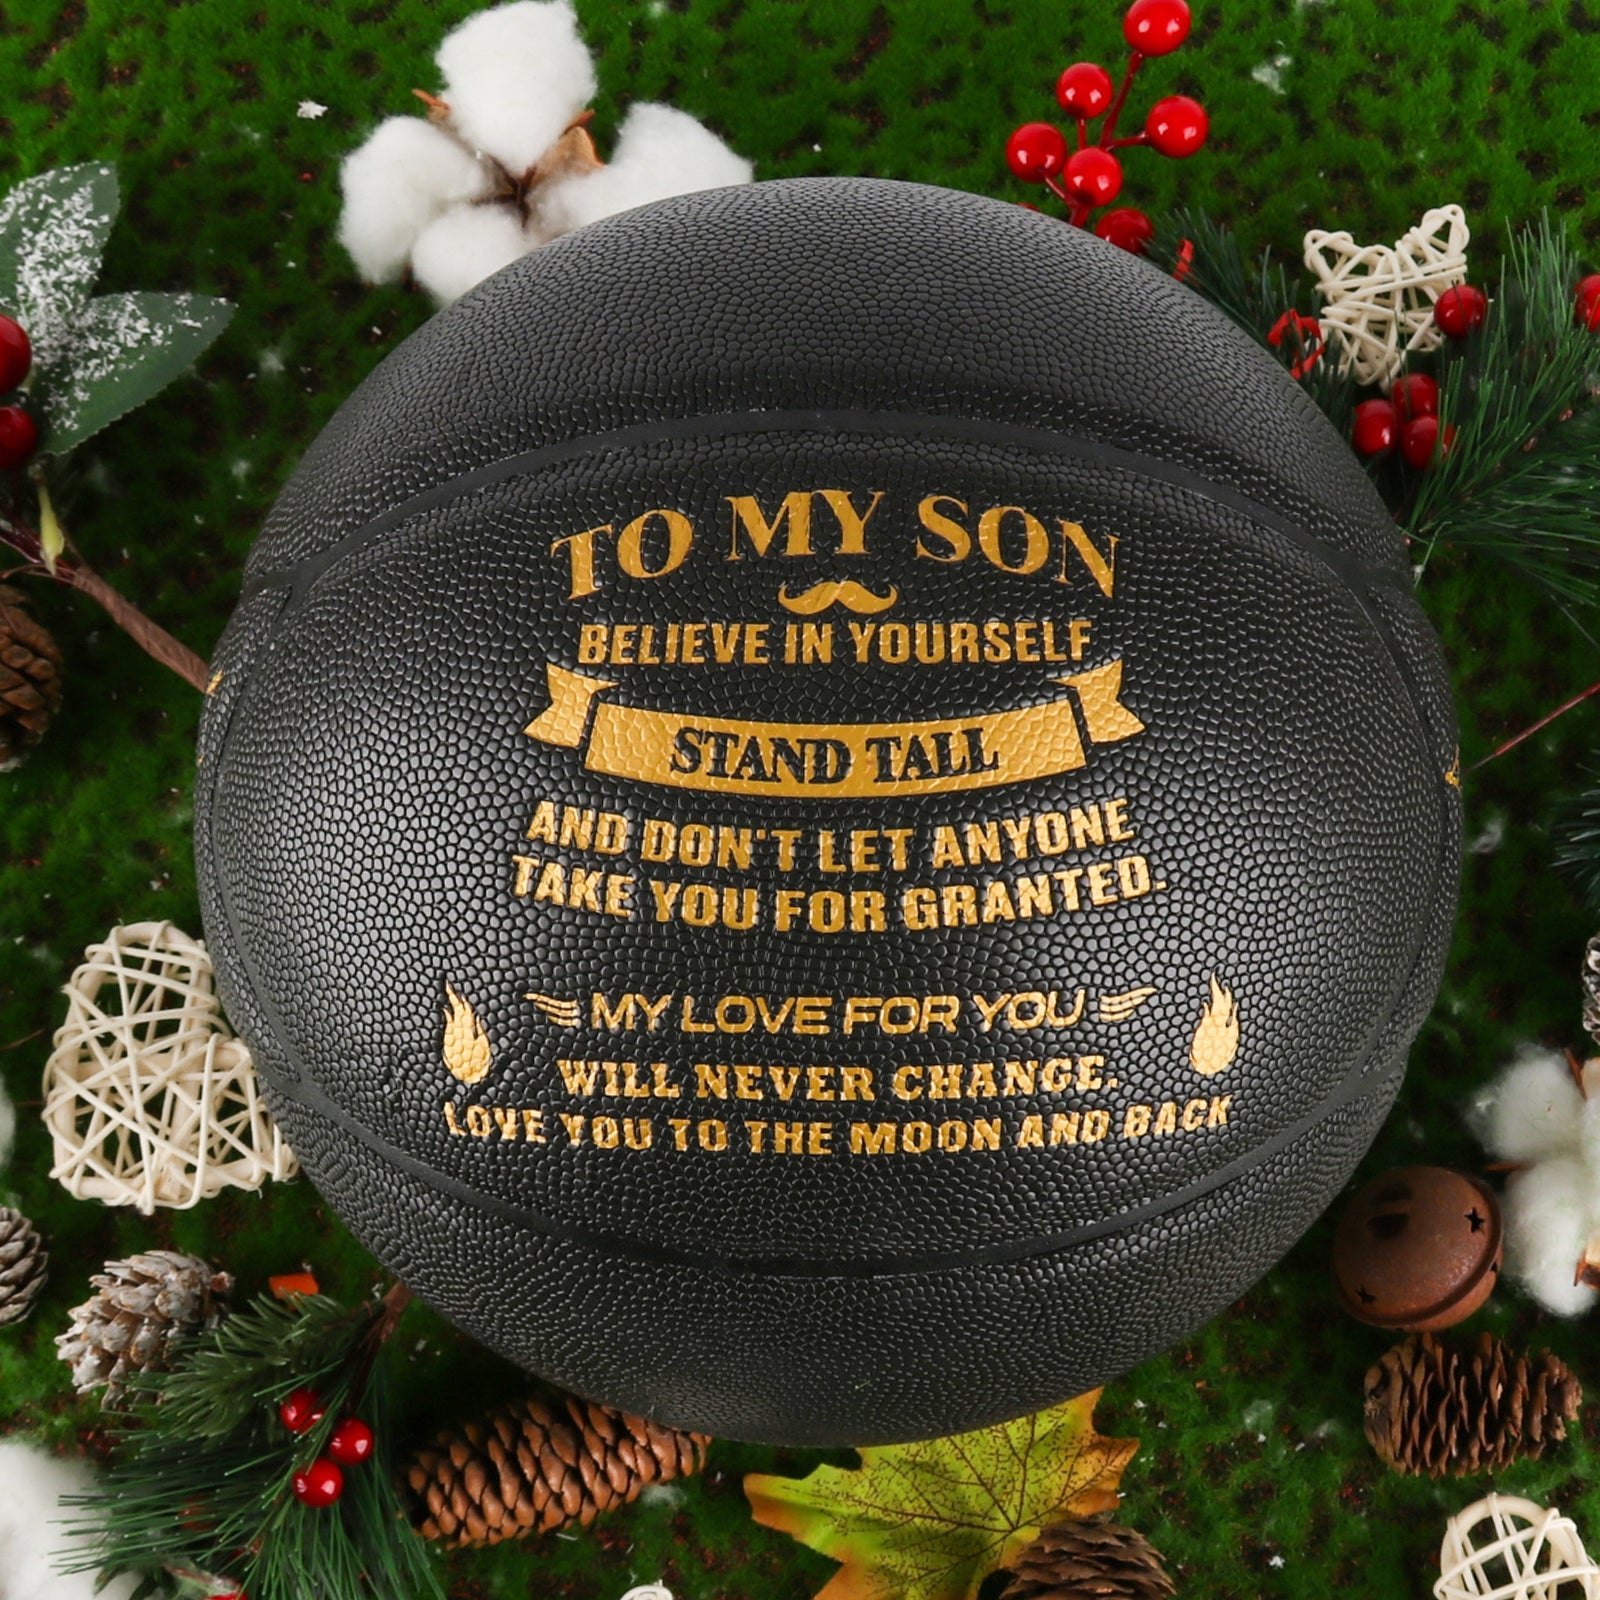 Personalized Letter Basketball For Son, Basketball Indoor/Outdoor Game Ball For Boy, Birthday Christmas Gift For Son, Black - Family Watchs